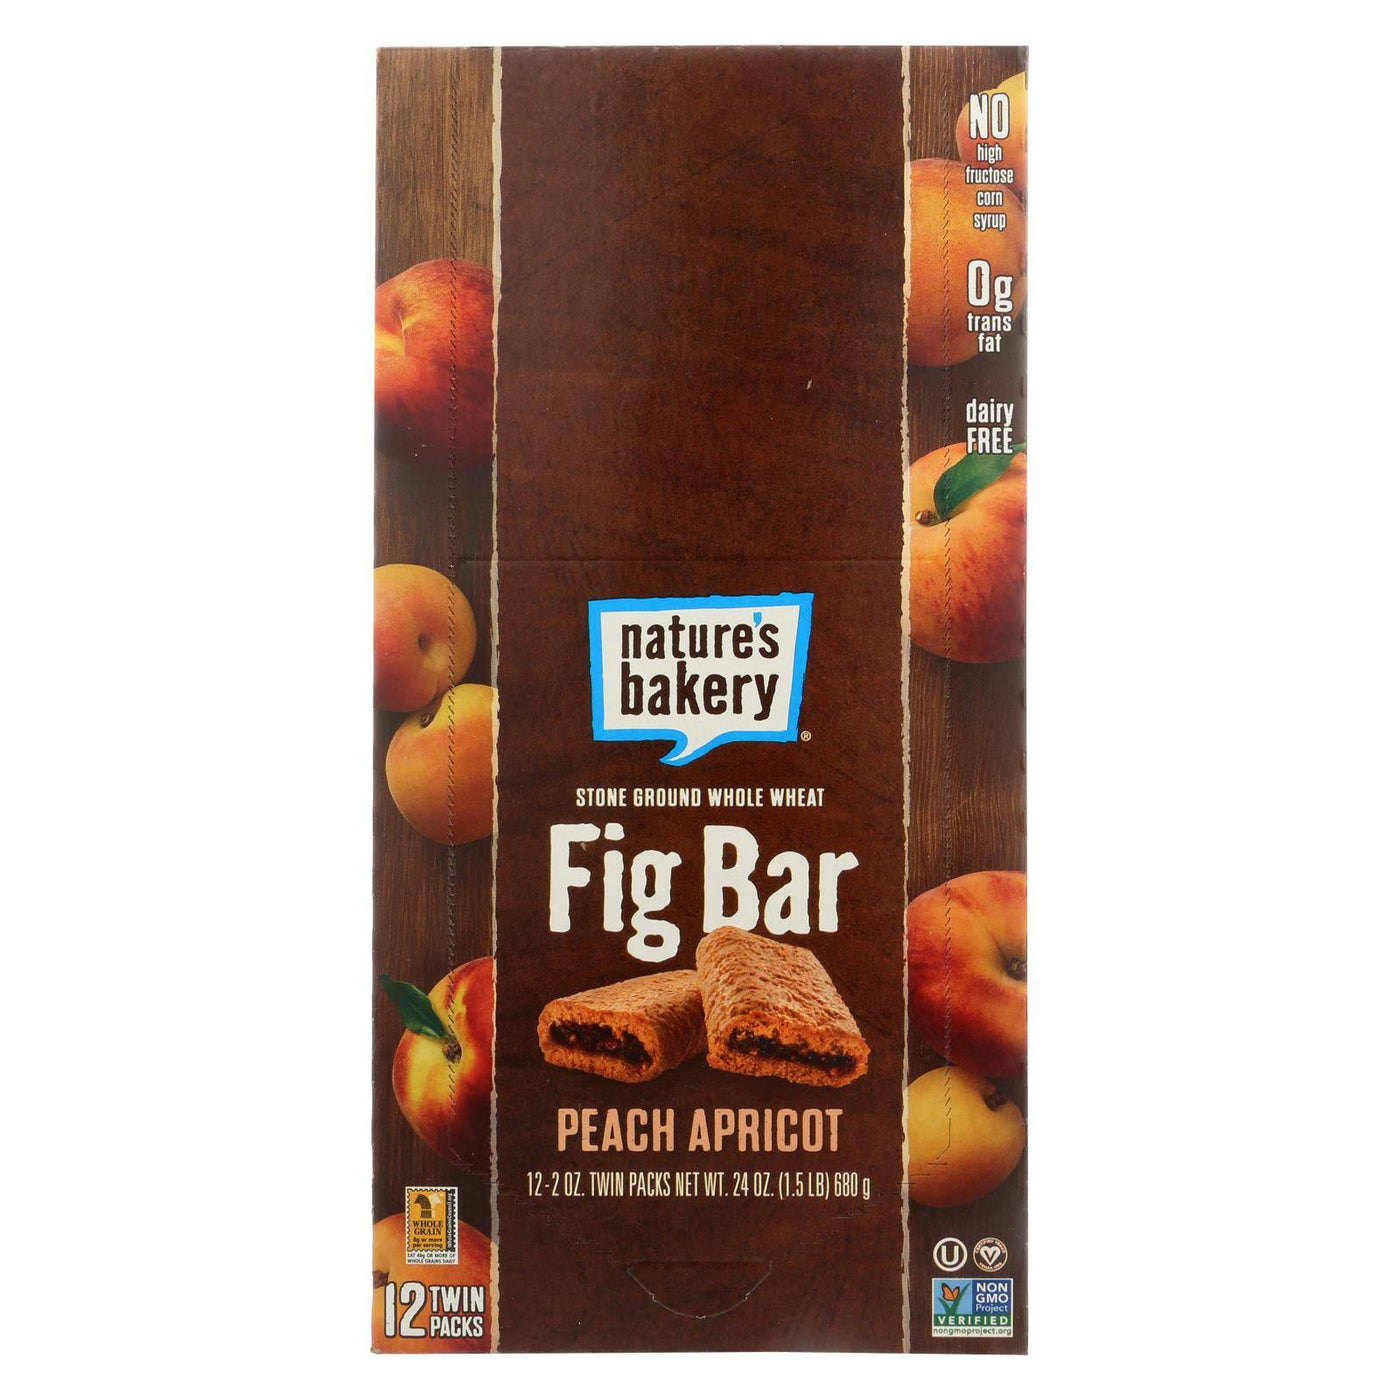 Buy Nature's Bakery Stone Ground Whole Wheat Fig Bar - Peach Apricot - 2 Oz - Case Of 12  at OnlyNaturals.us